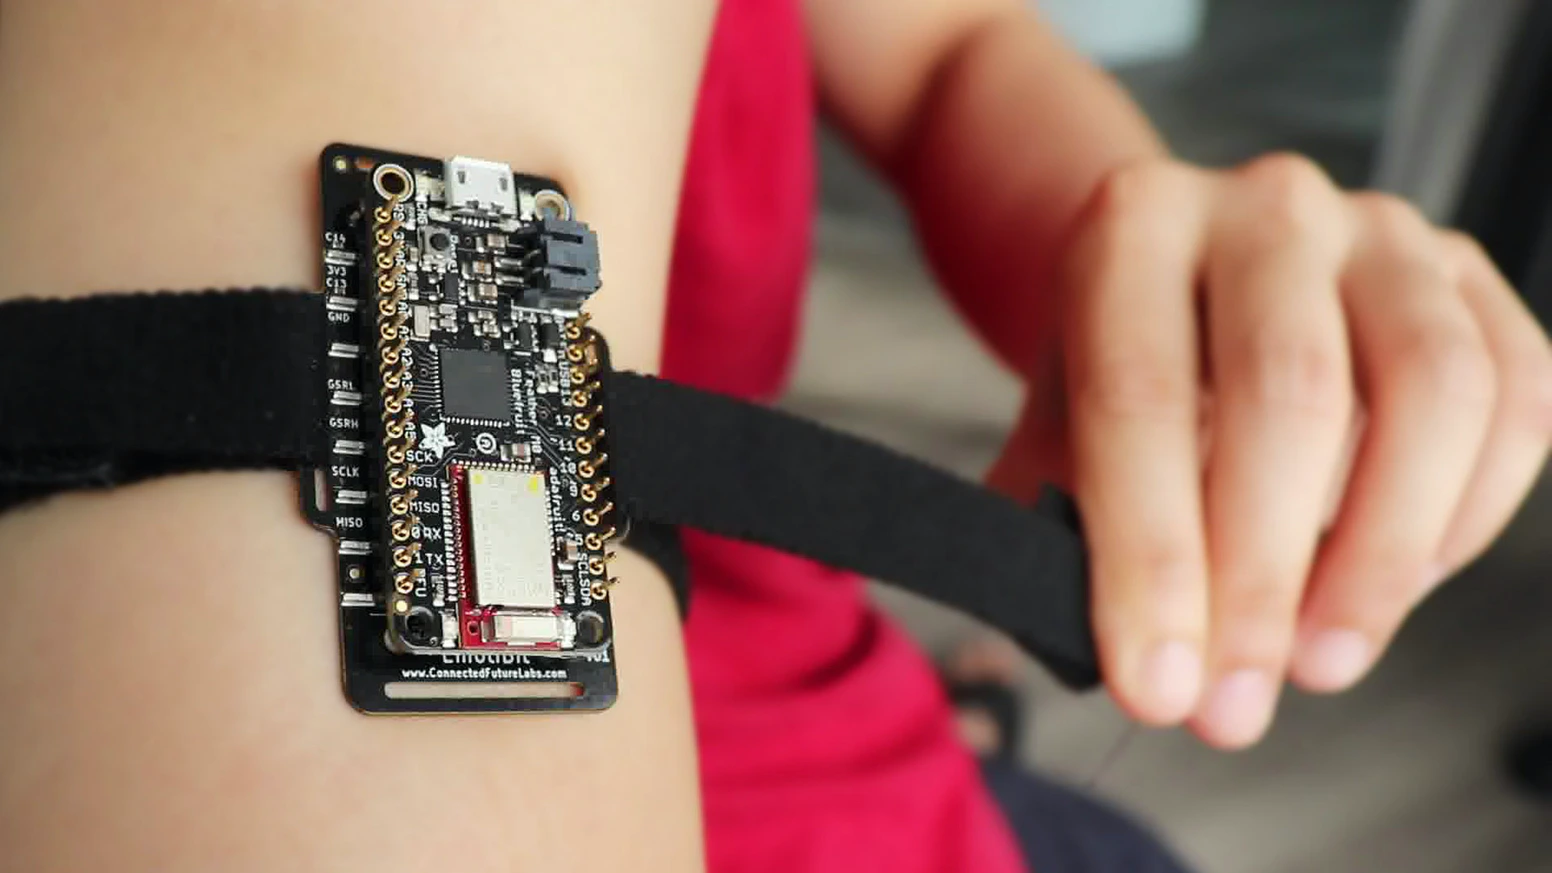 An open-source (Arduino-driven) sensor for capturing high-quality emotional, physiological, and movement data that is 100% user-owned